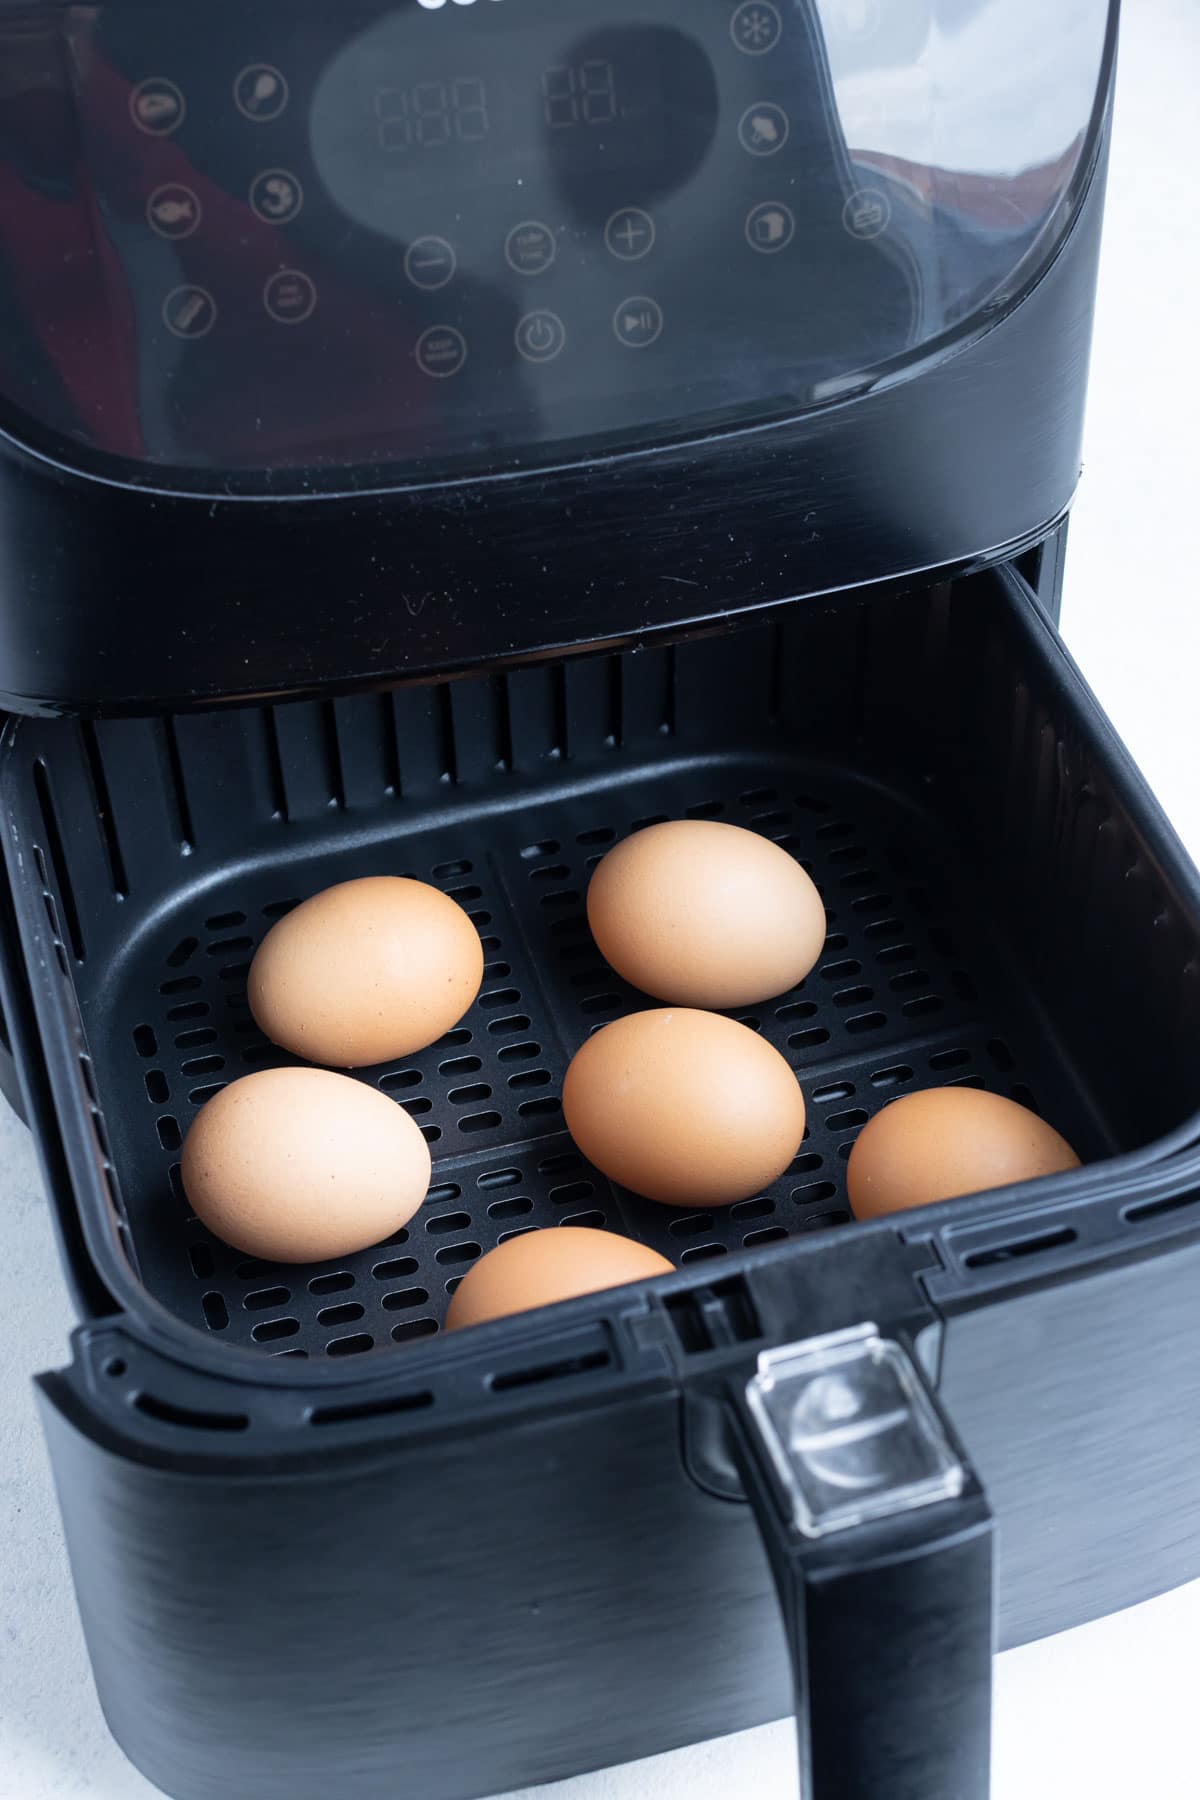 Fresh eggs are cooked until hard-boiled.